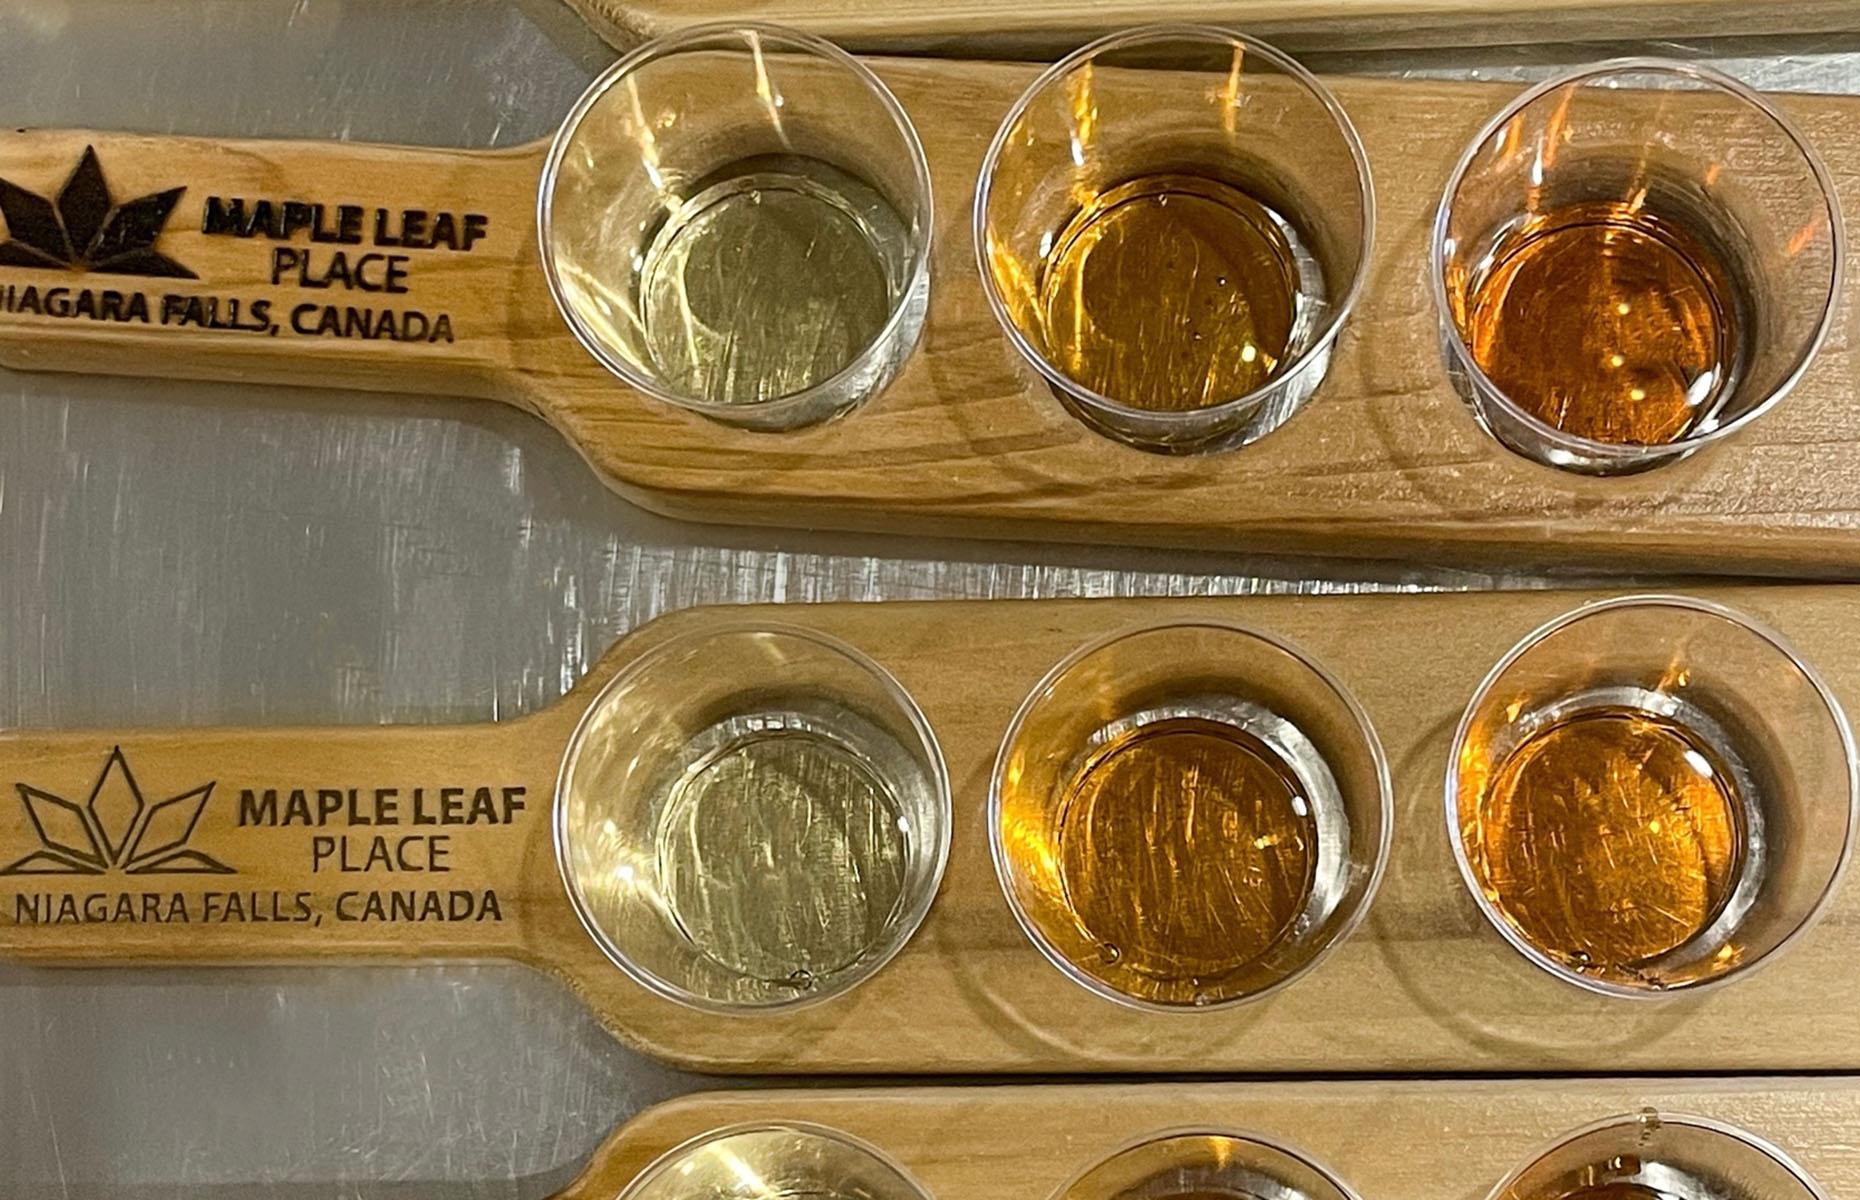 <p>Maple syrup tasting will give you a sweetness craving you didn’t know you had. Head to <a href="https://www.mapleleafplace.ca/">Maple Leaf Place</a> on River Road for a free tasting. Flights of three different varieties of maple syrup allow you to decide on your favorite – then you can buy some to take home. Taste golden, which is from the first harvest; amber, which represents mid-harvest; and dark, from the final harvest.</p>  <p>A word of warning: they’re all delicious. Before you leave, pick up a souvenir in the gift shop and pose with the giant toy moose.</p>